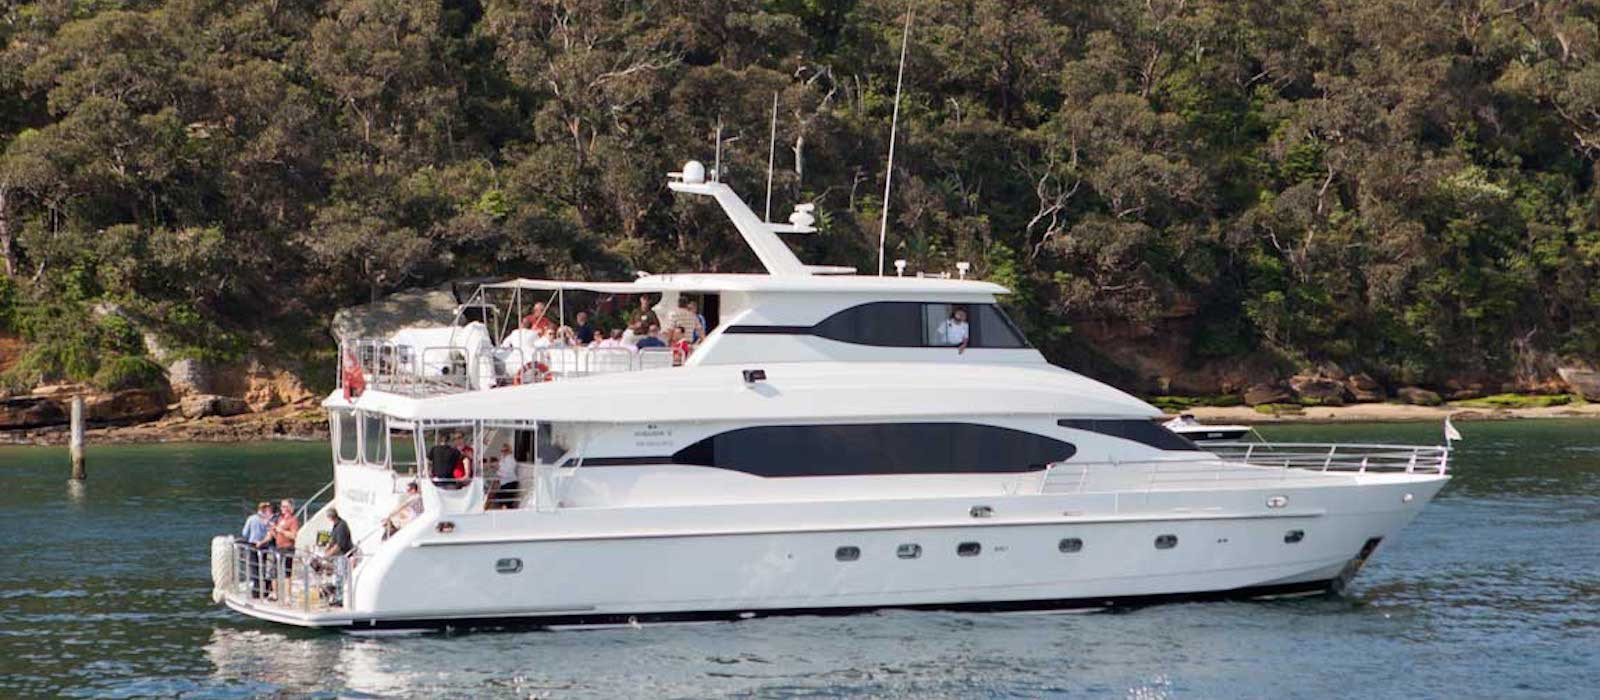 Oceanos luxury boat hire in secluded bay